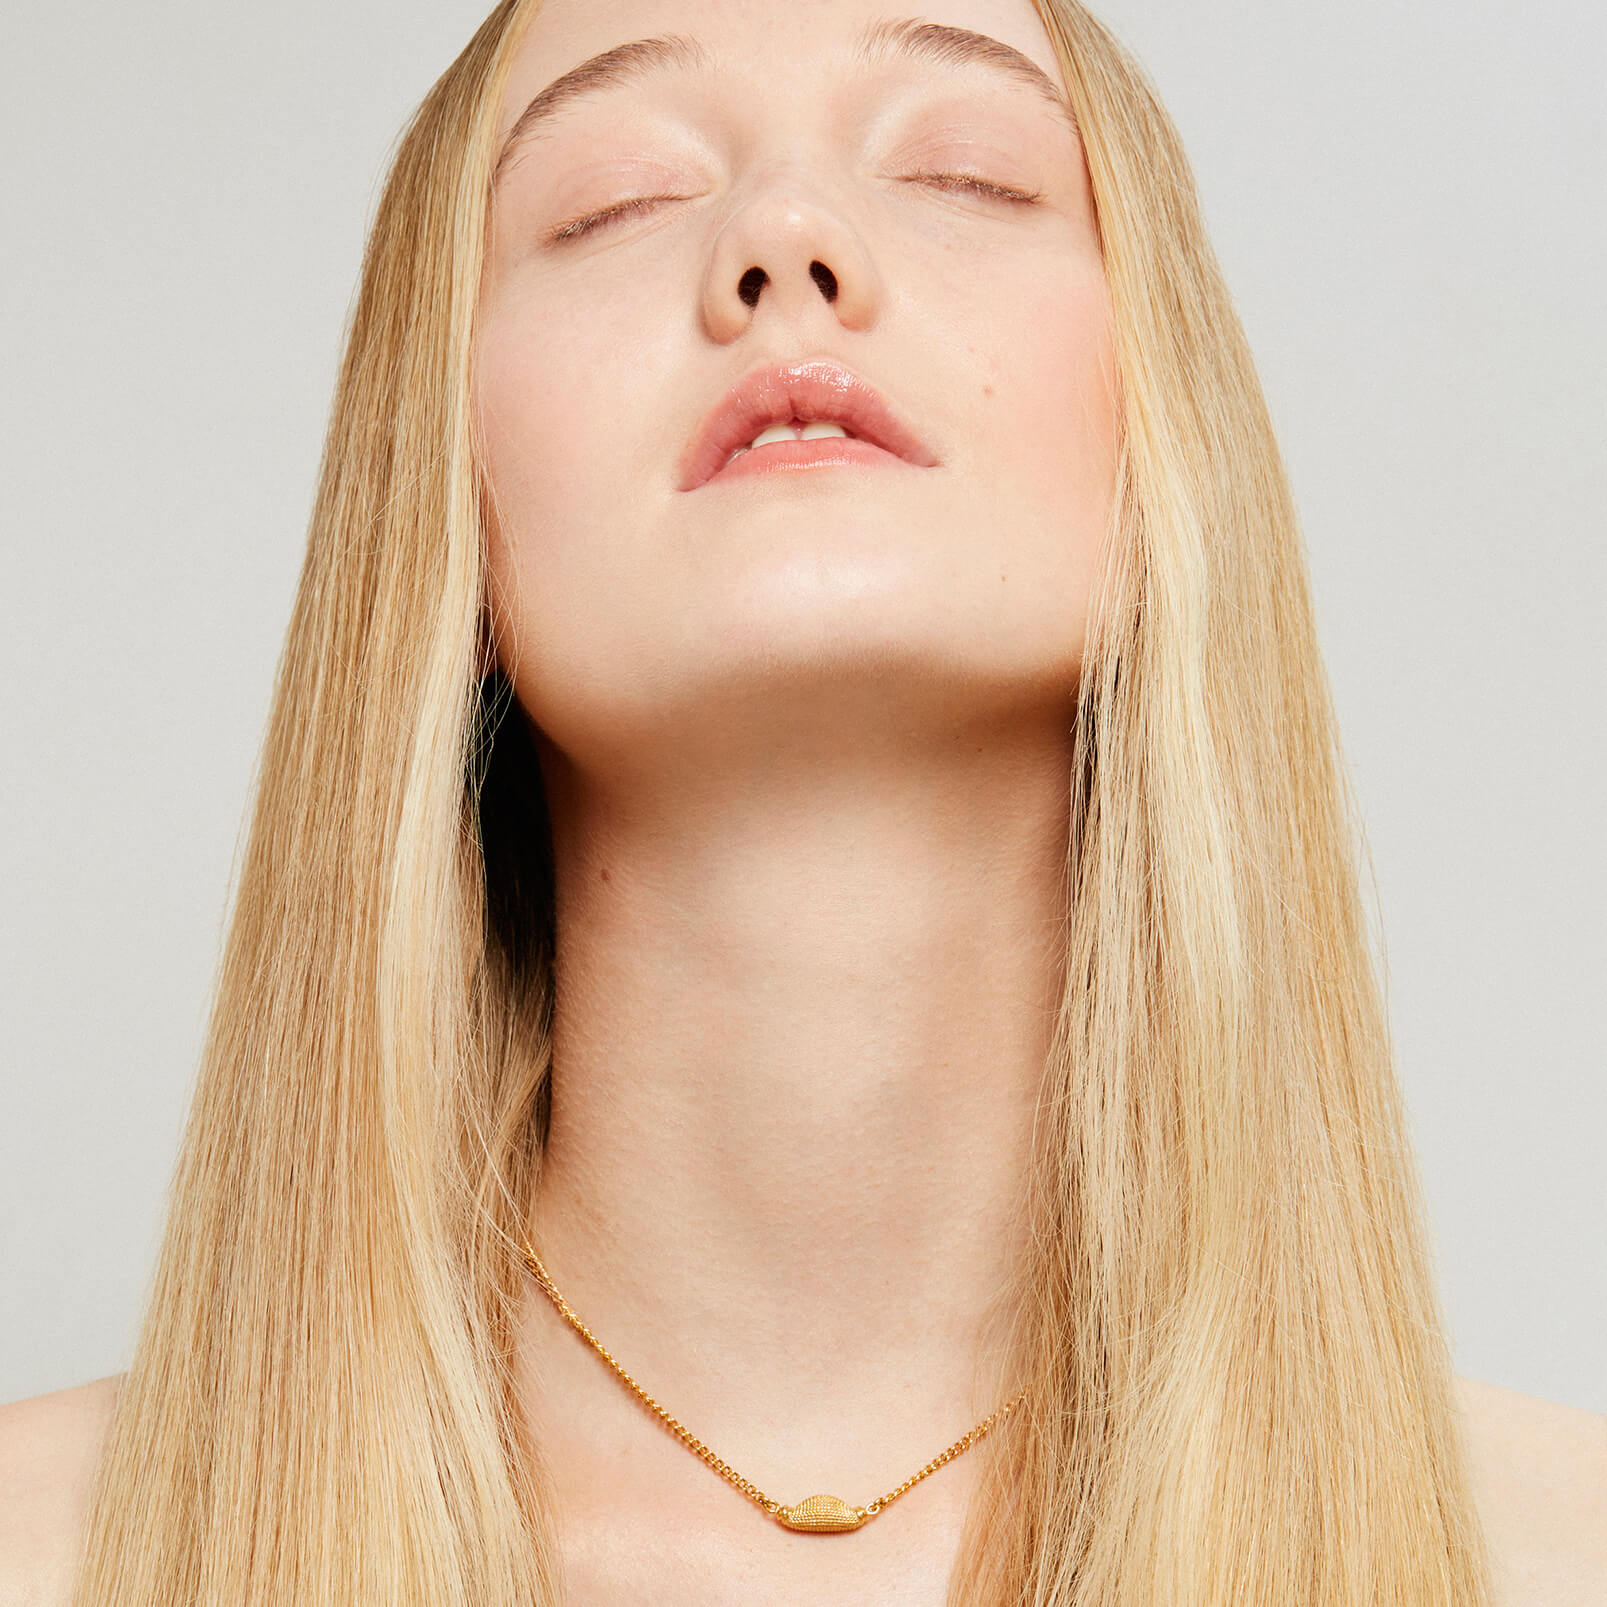 Model wearing a short gold necklace with nugget design